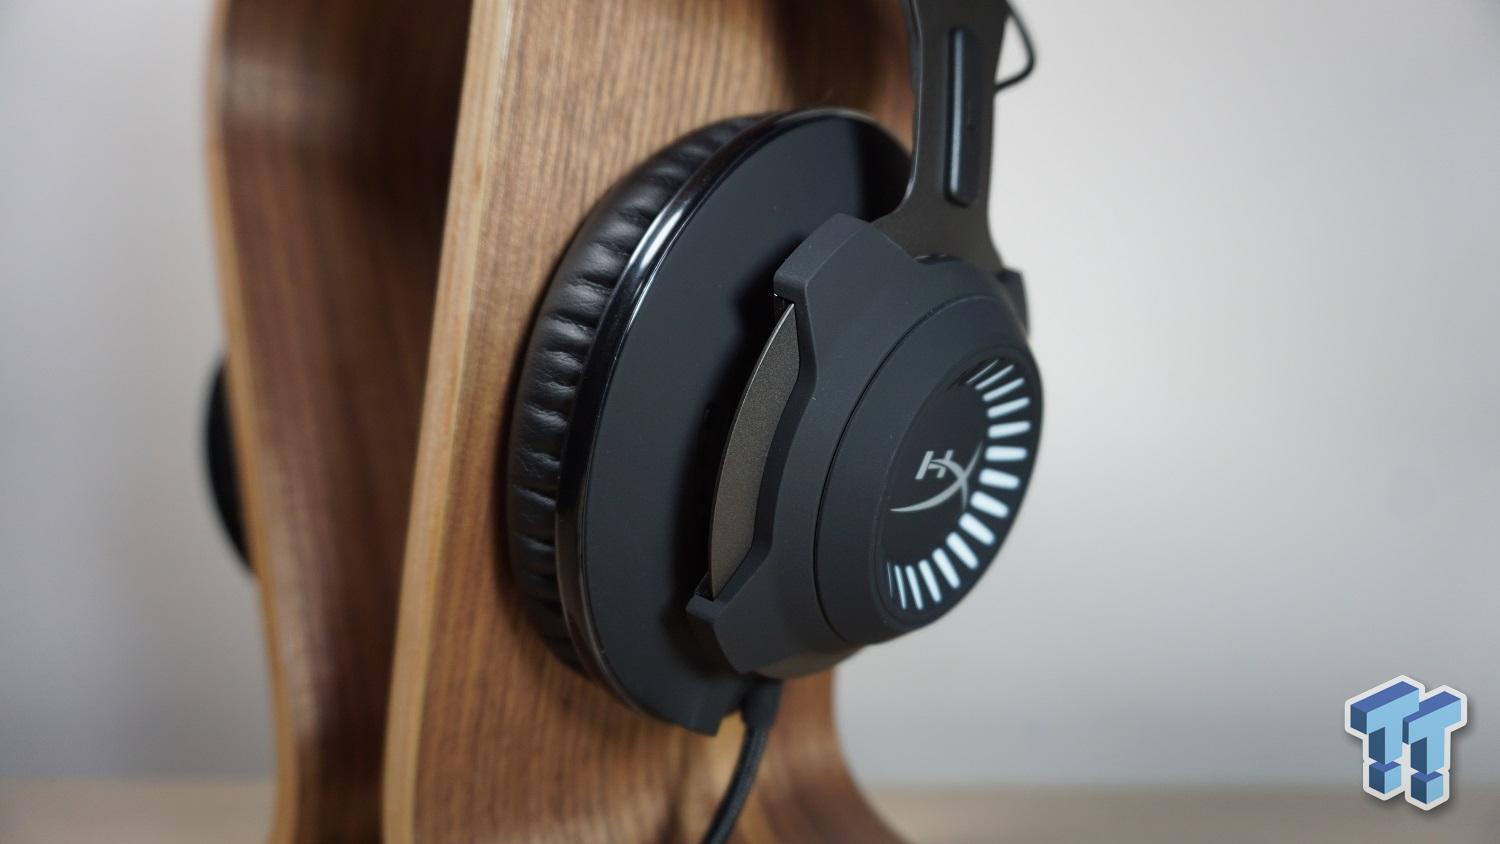 HyperX Revolver S Gaming Headset Review